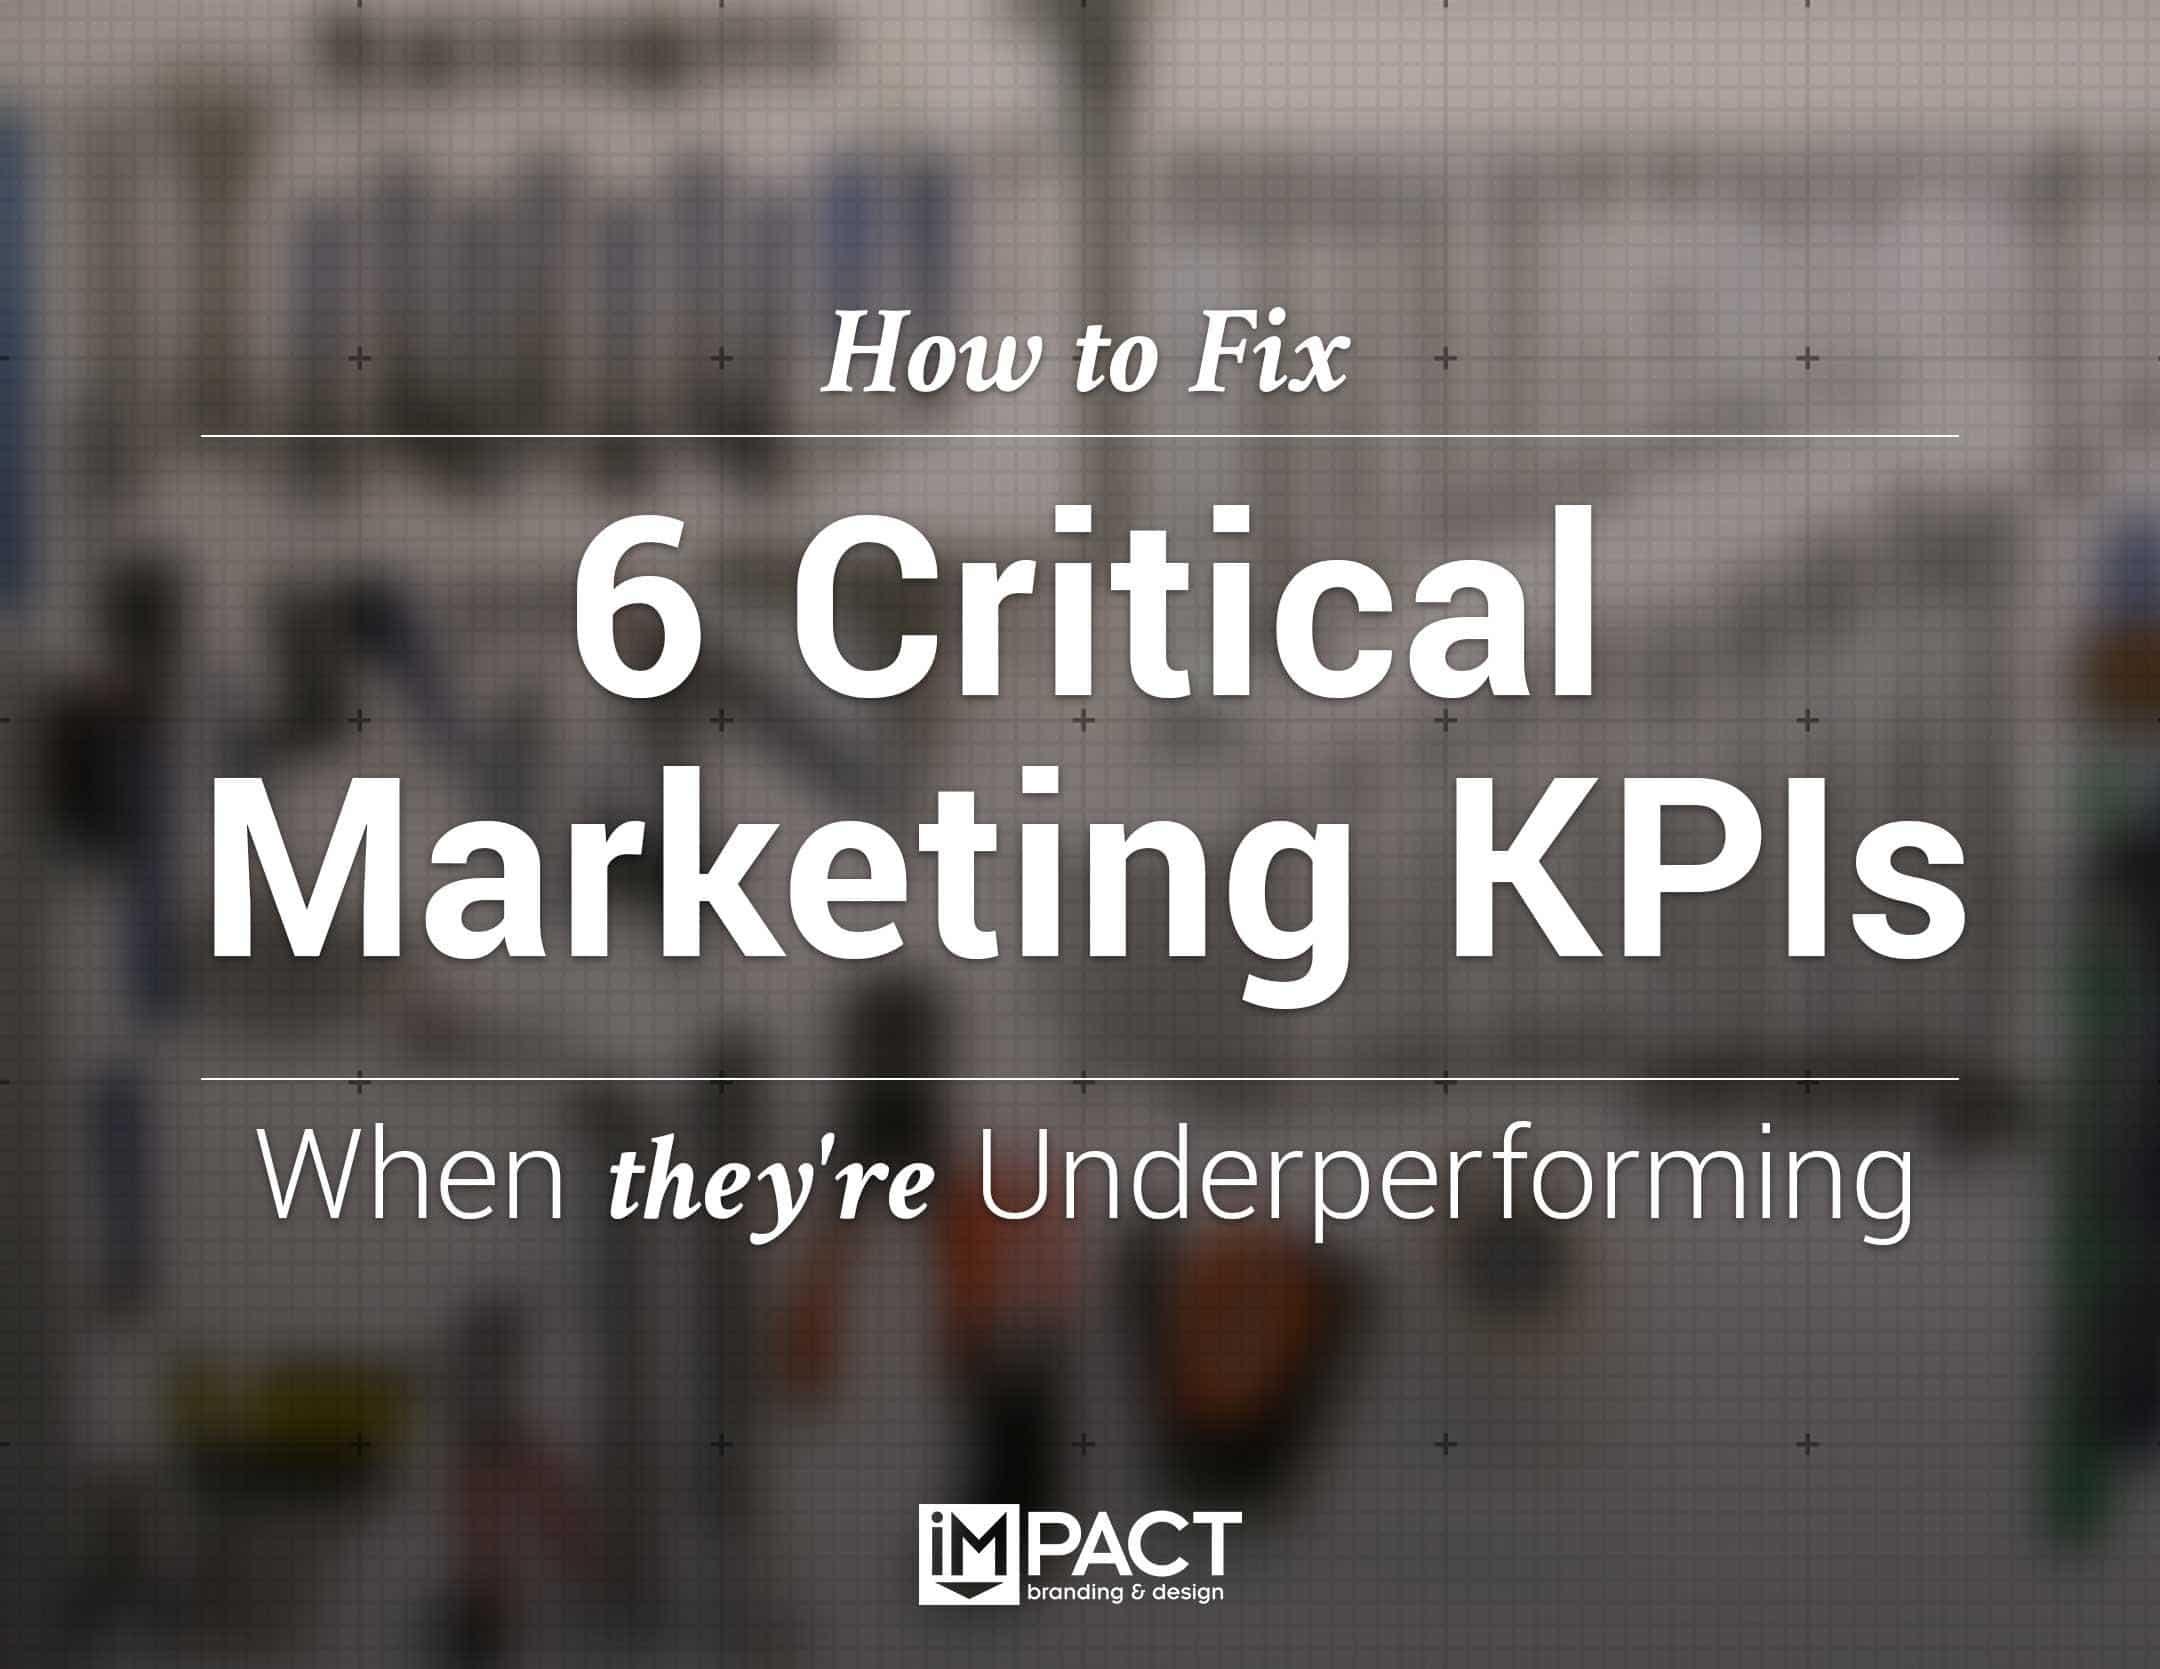 Free Ebook: How to Fix 6 Critical Marketing KPIs When They're Underperforming